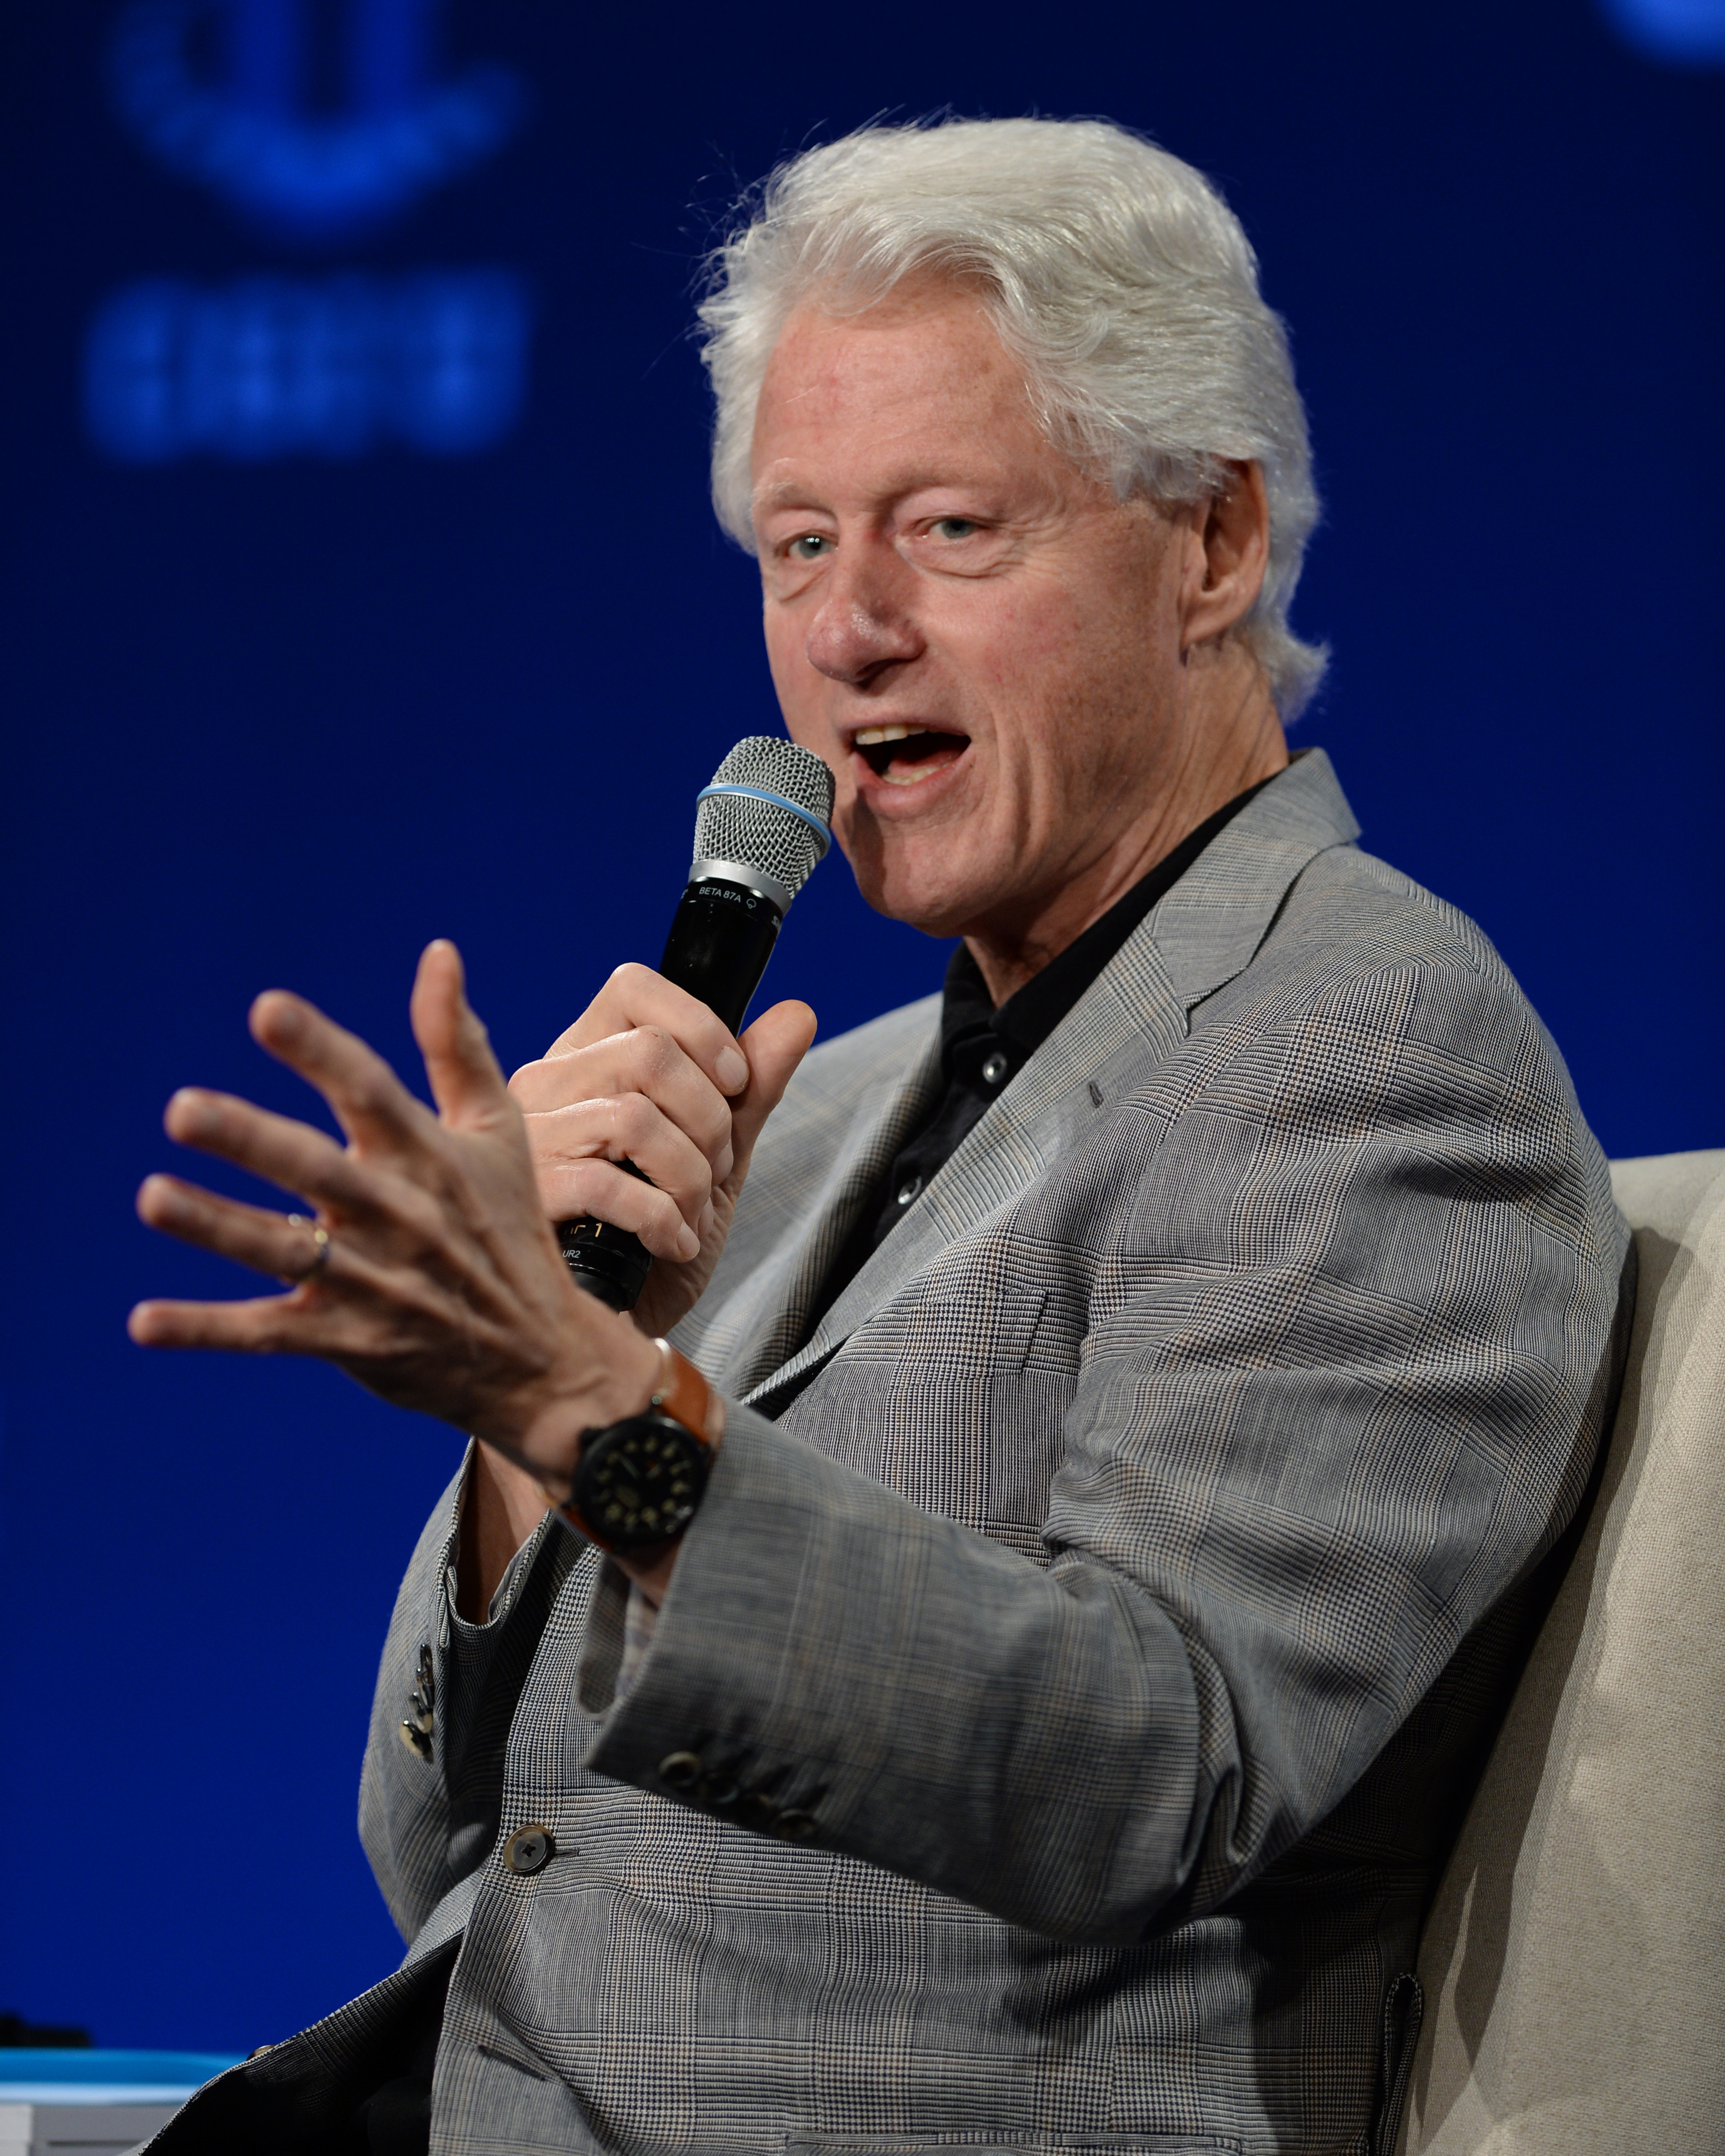 Former US President Bill Clinton attends the Clinton Global Initiative University at University of Miami on March 7, 2015 in Miami, Florida. (Larry Marano&mdash;Getty Images)